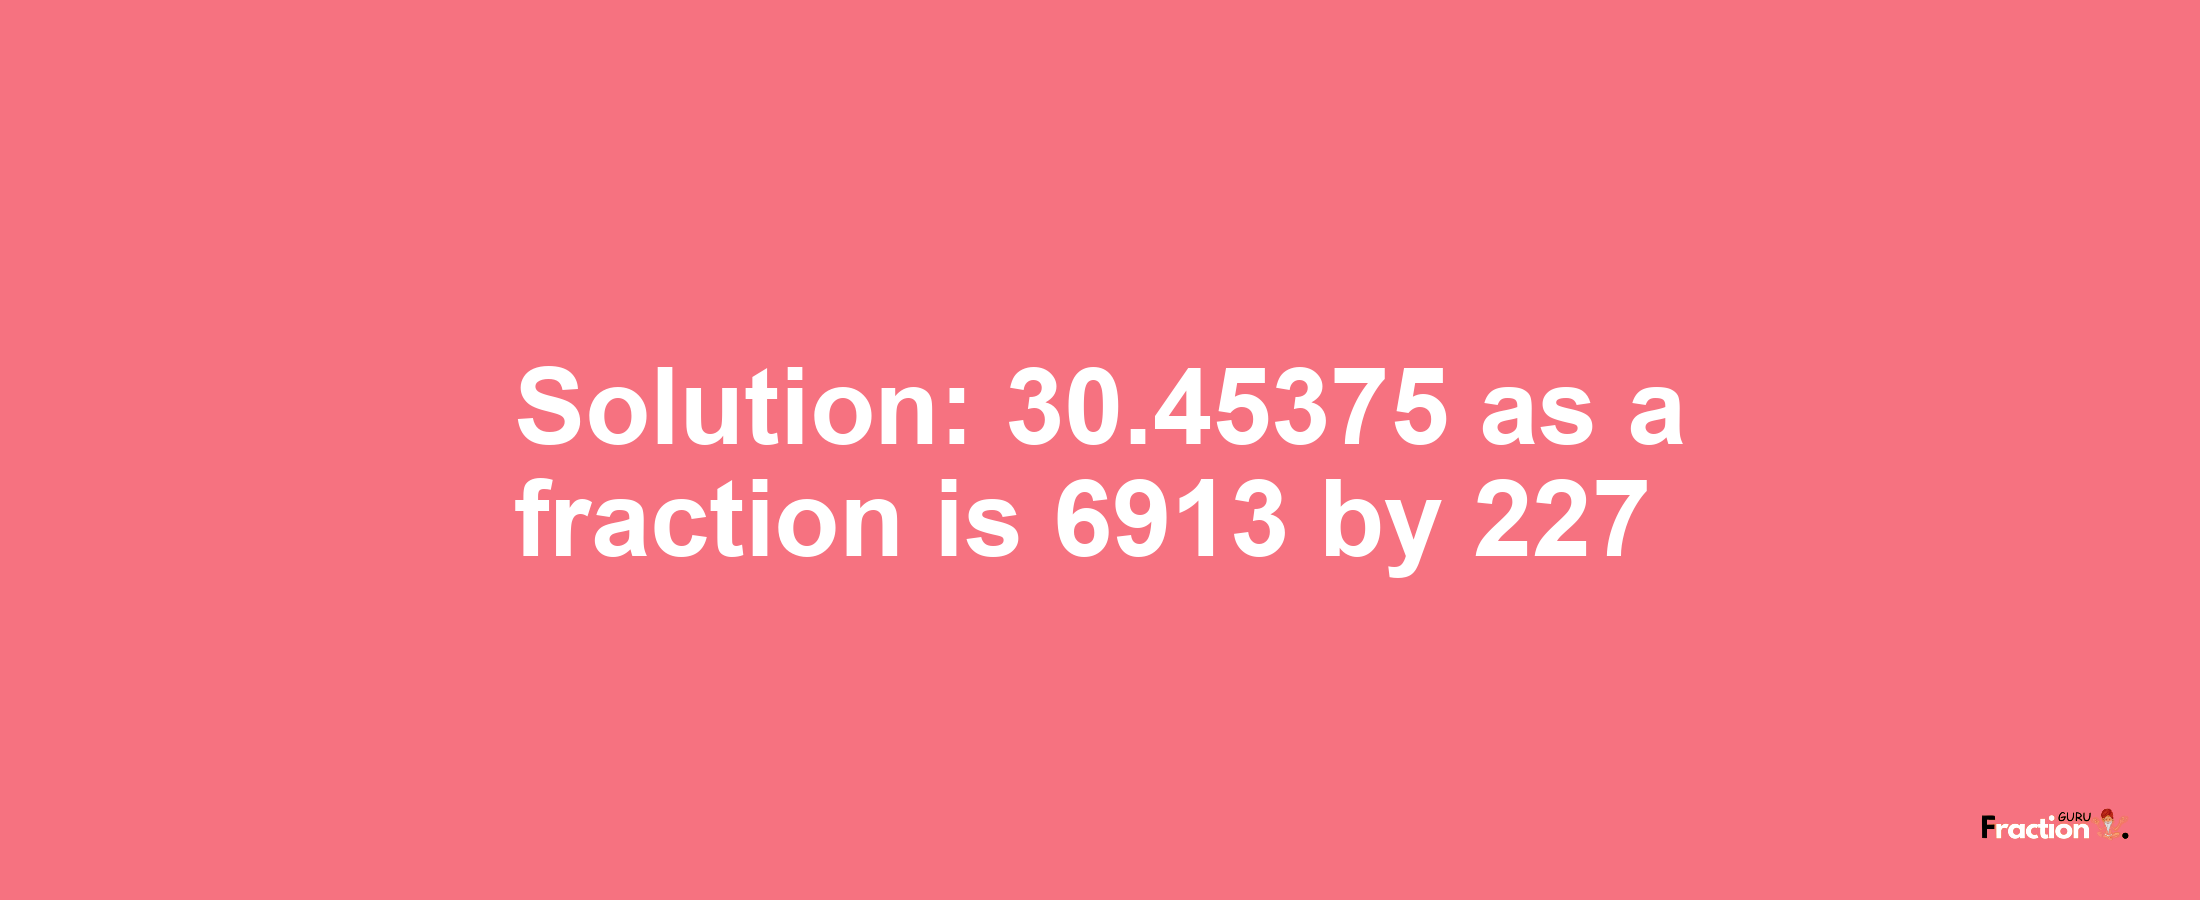 Solution:30.45375 as a fraction is 6913/227